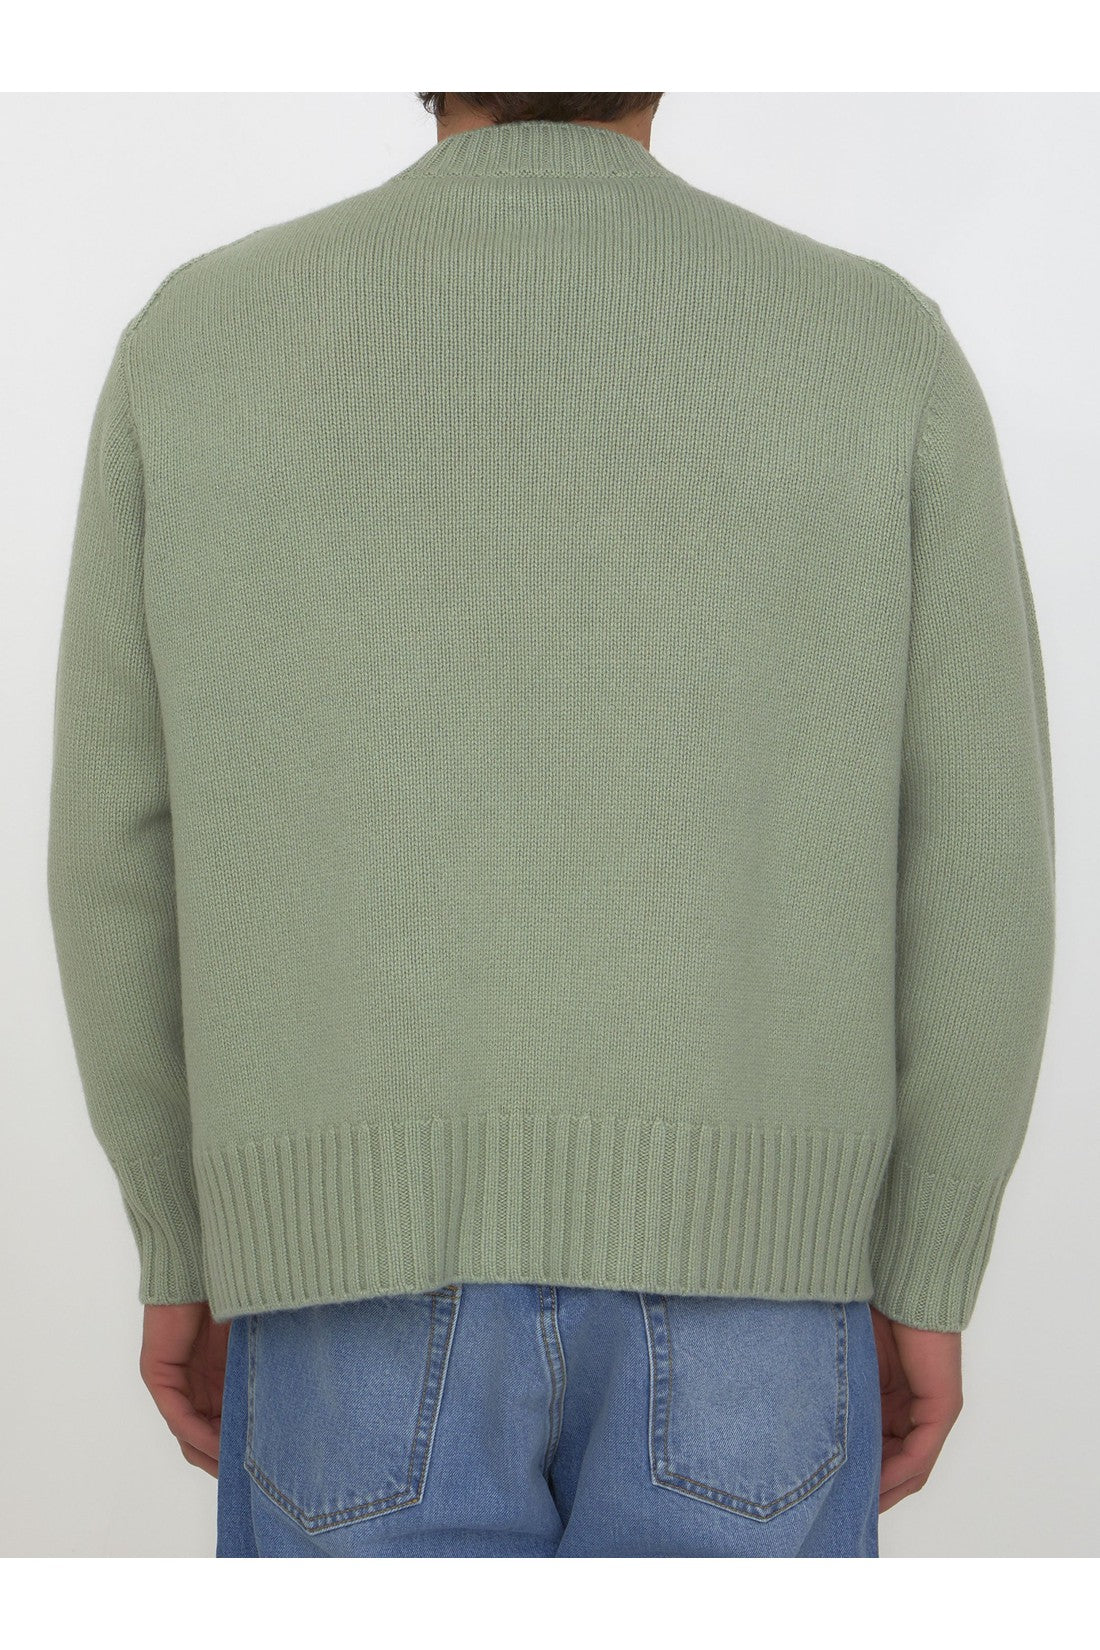 Green cashmere sweater